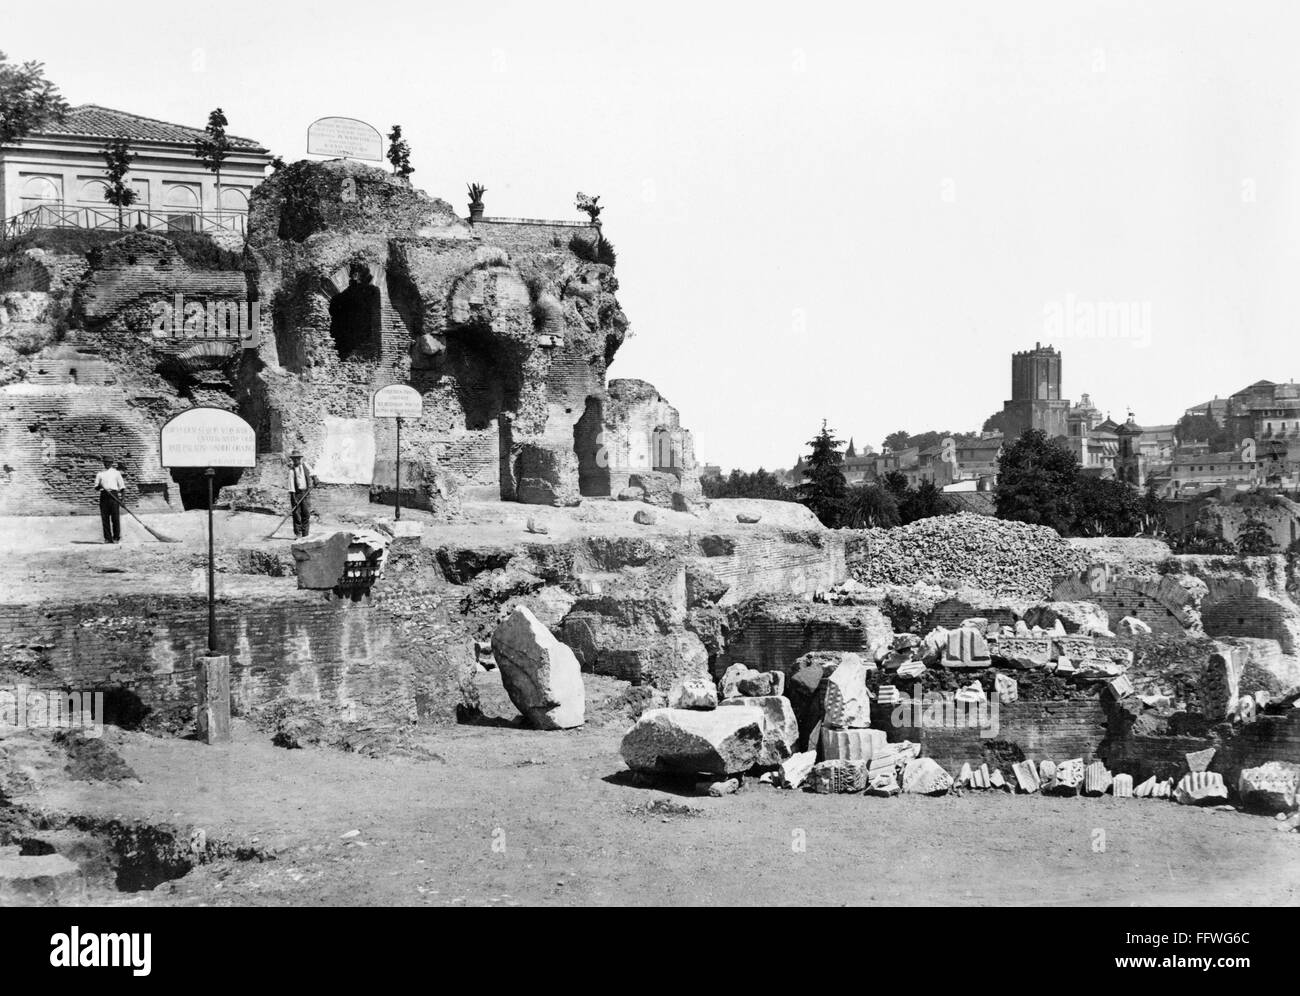 ROME: PALATINE HILL. /nRuins of Palatine Hill in Rome. Photograph, late 19th century. Stock Photo